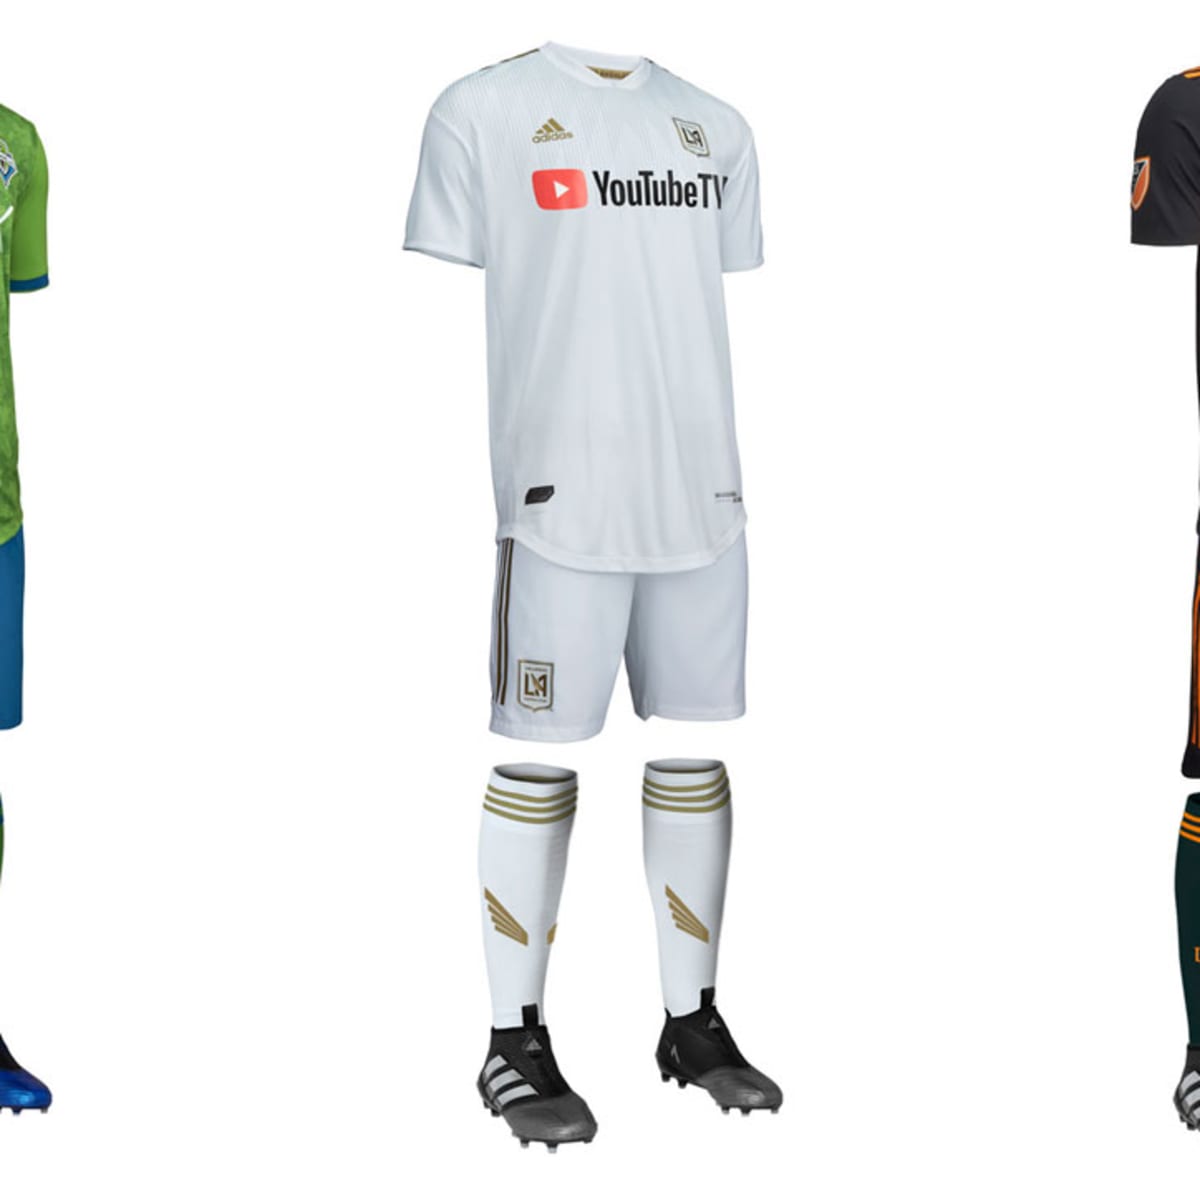 Complete guide to the 2018 MLS season uniforms